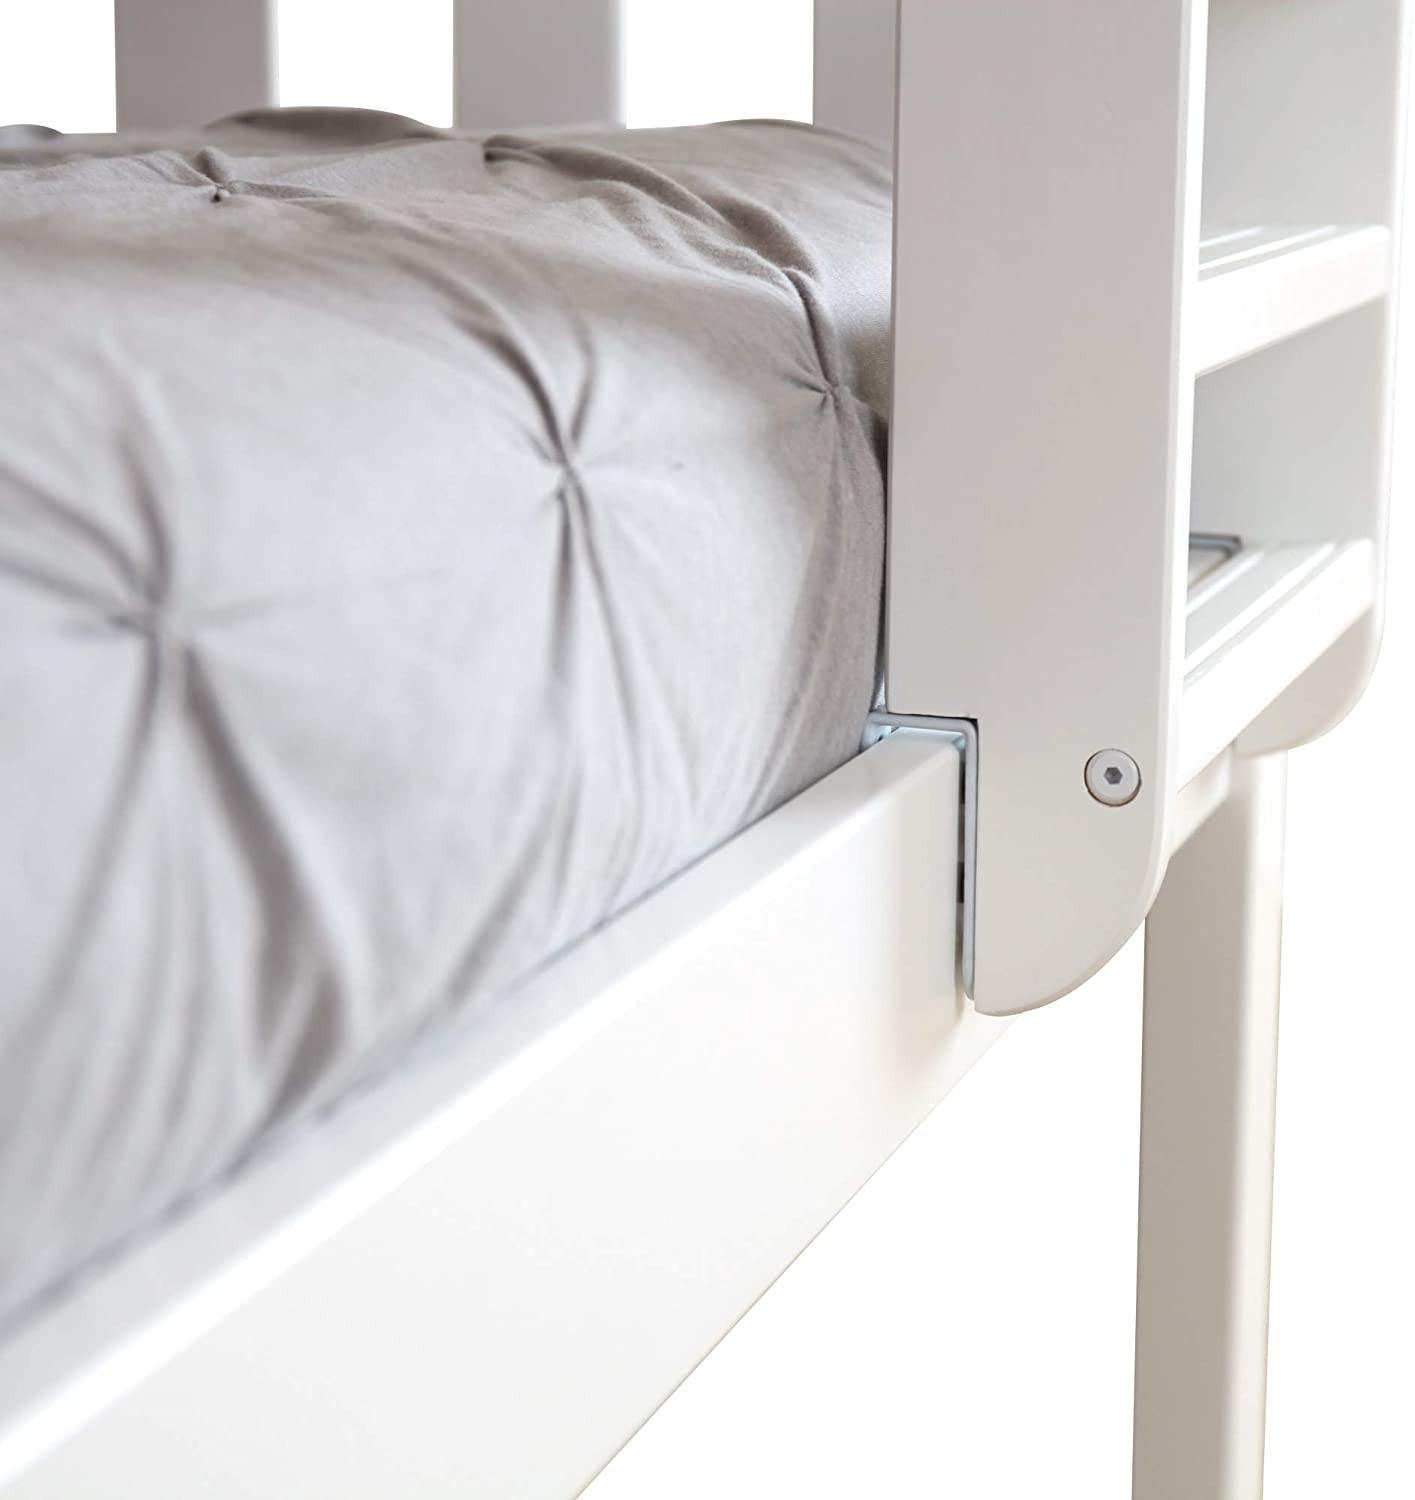 SOLID WOOD TWIN OVER TWIN BUNK BED IN WHITE WITH TRUNDLE BED